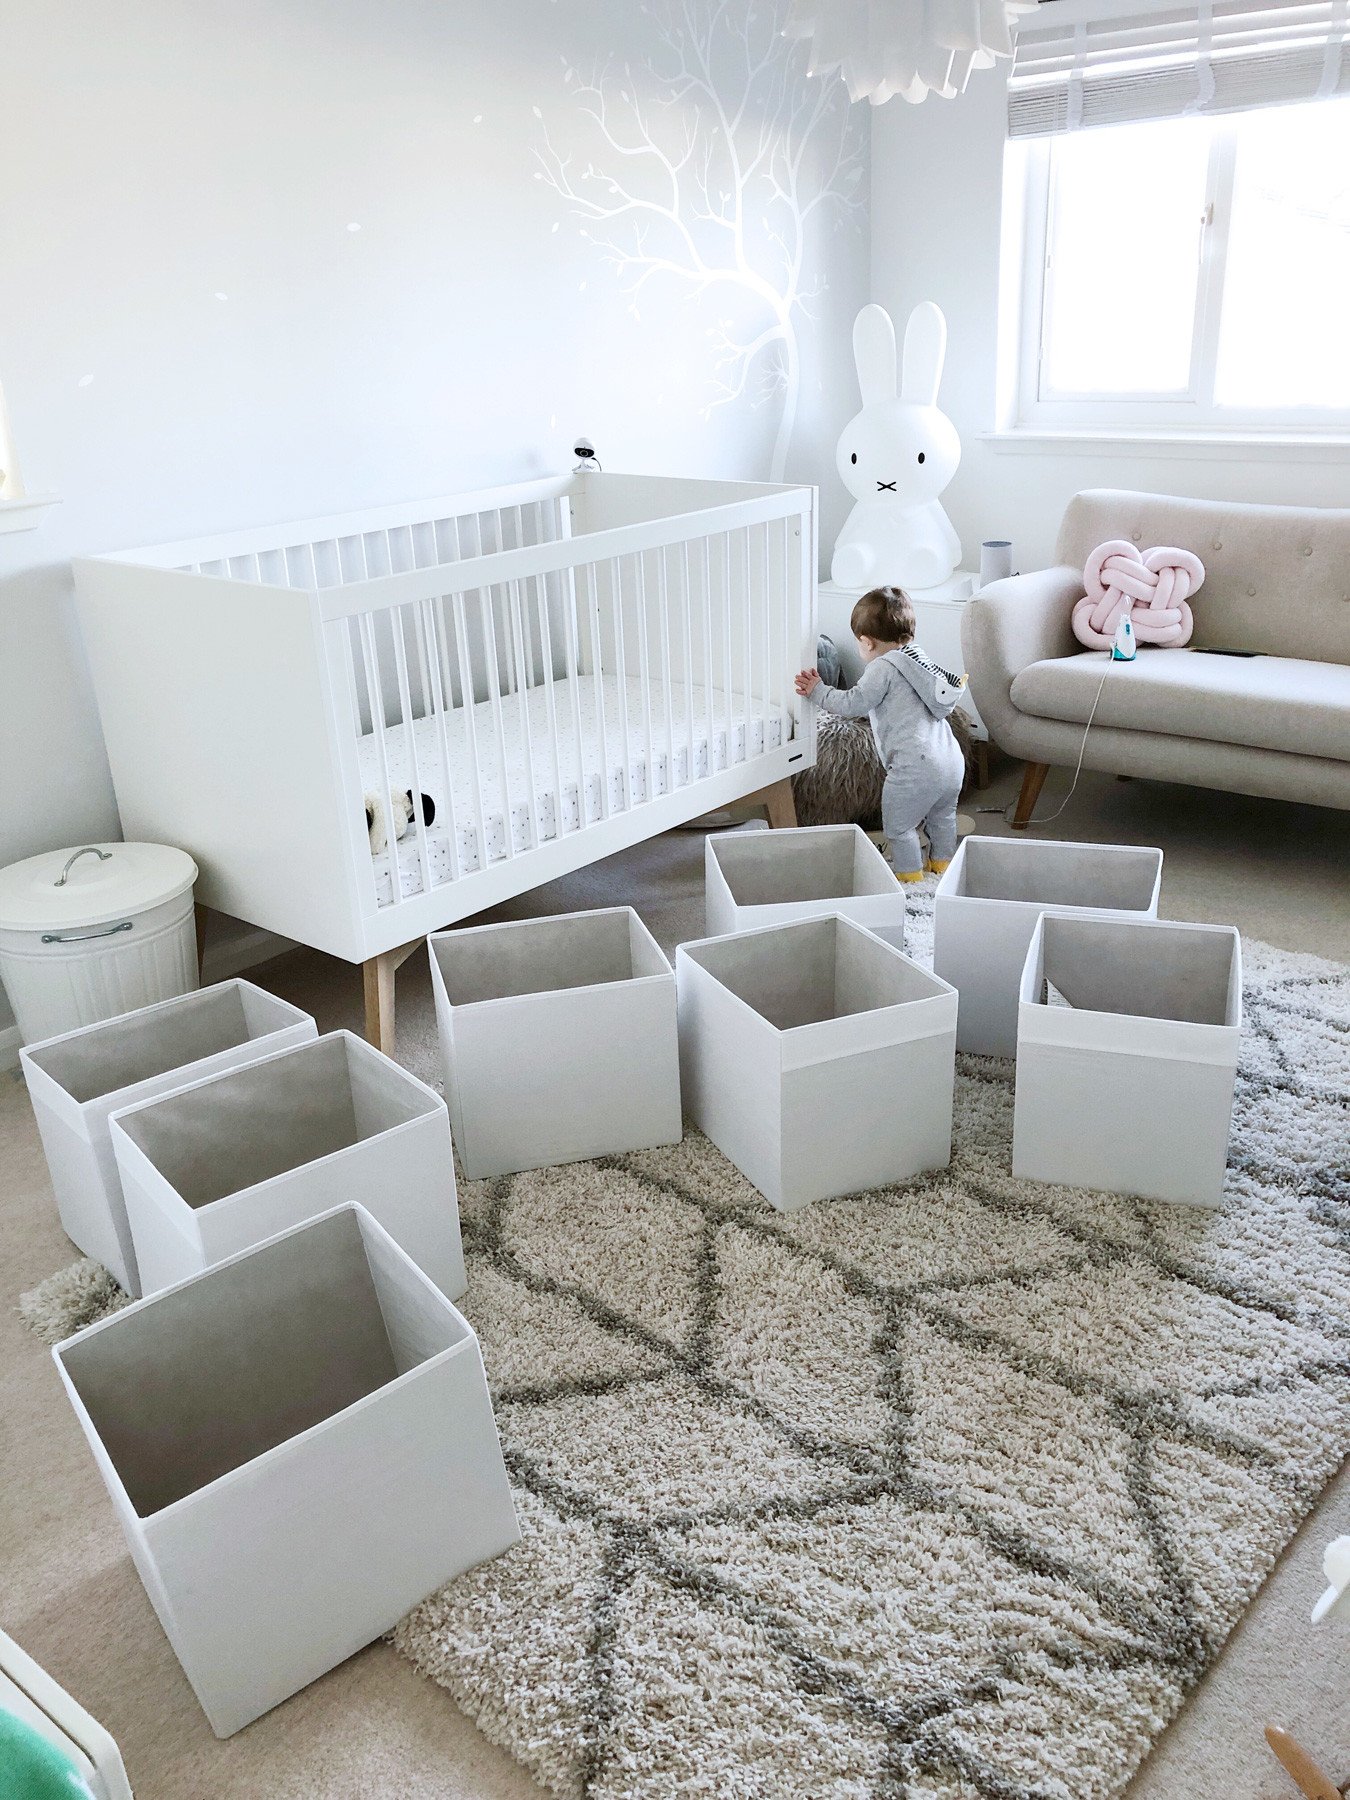 Ikea storage boxes in baby's nursery